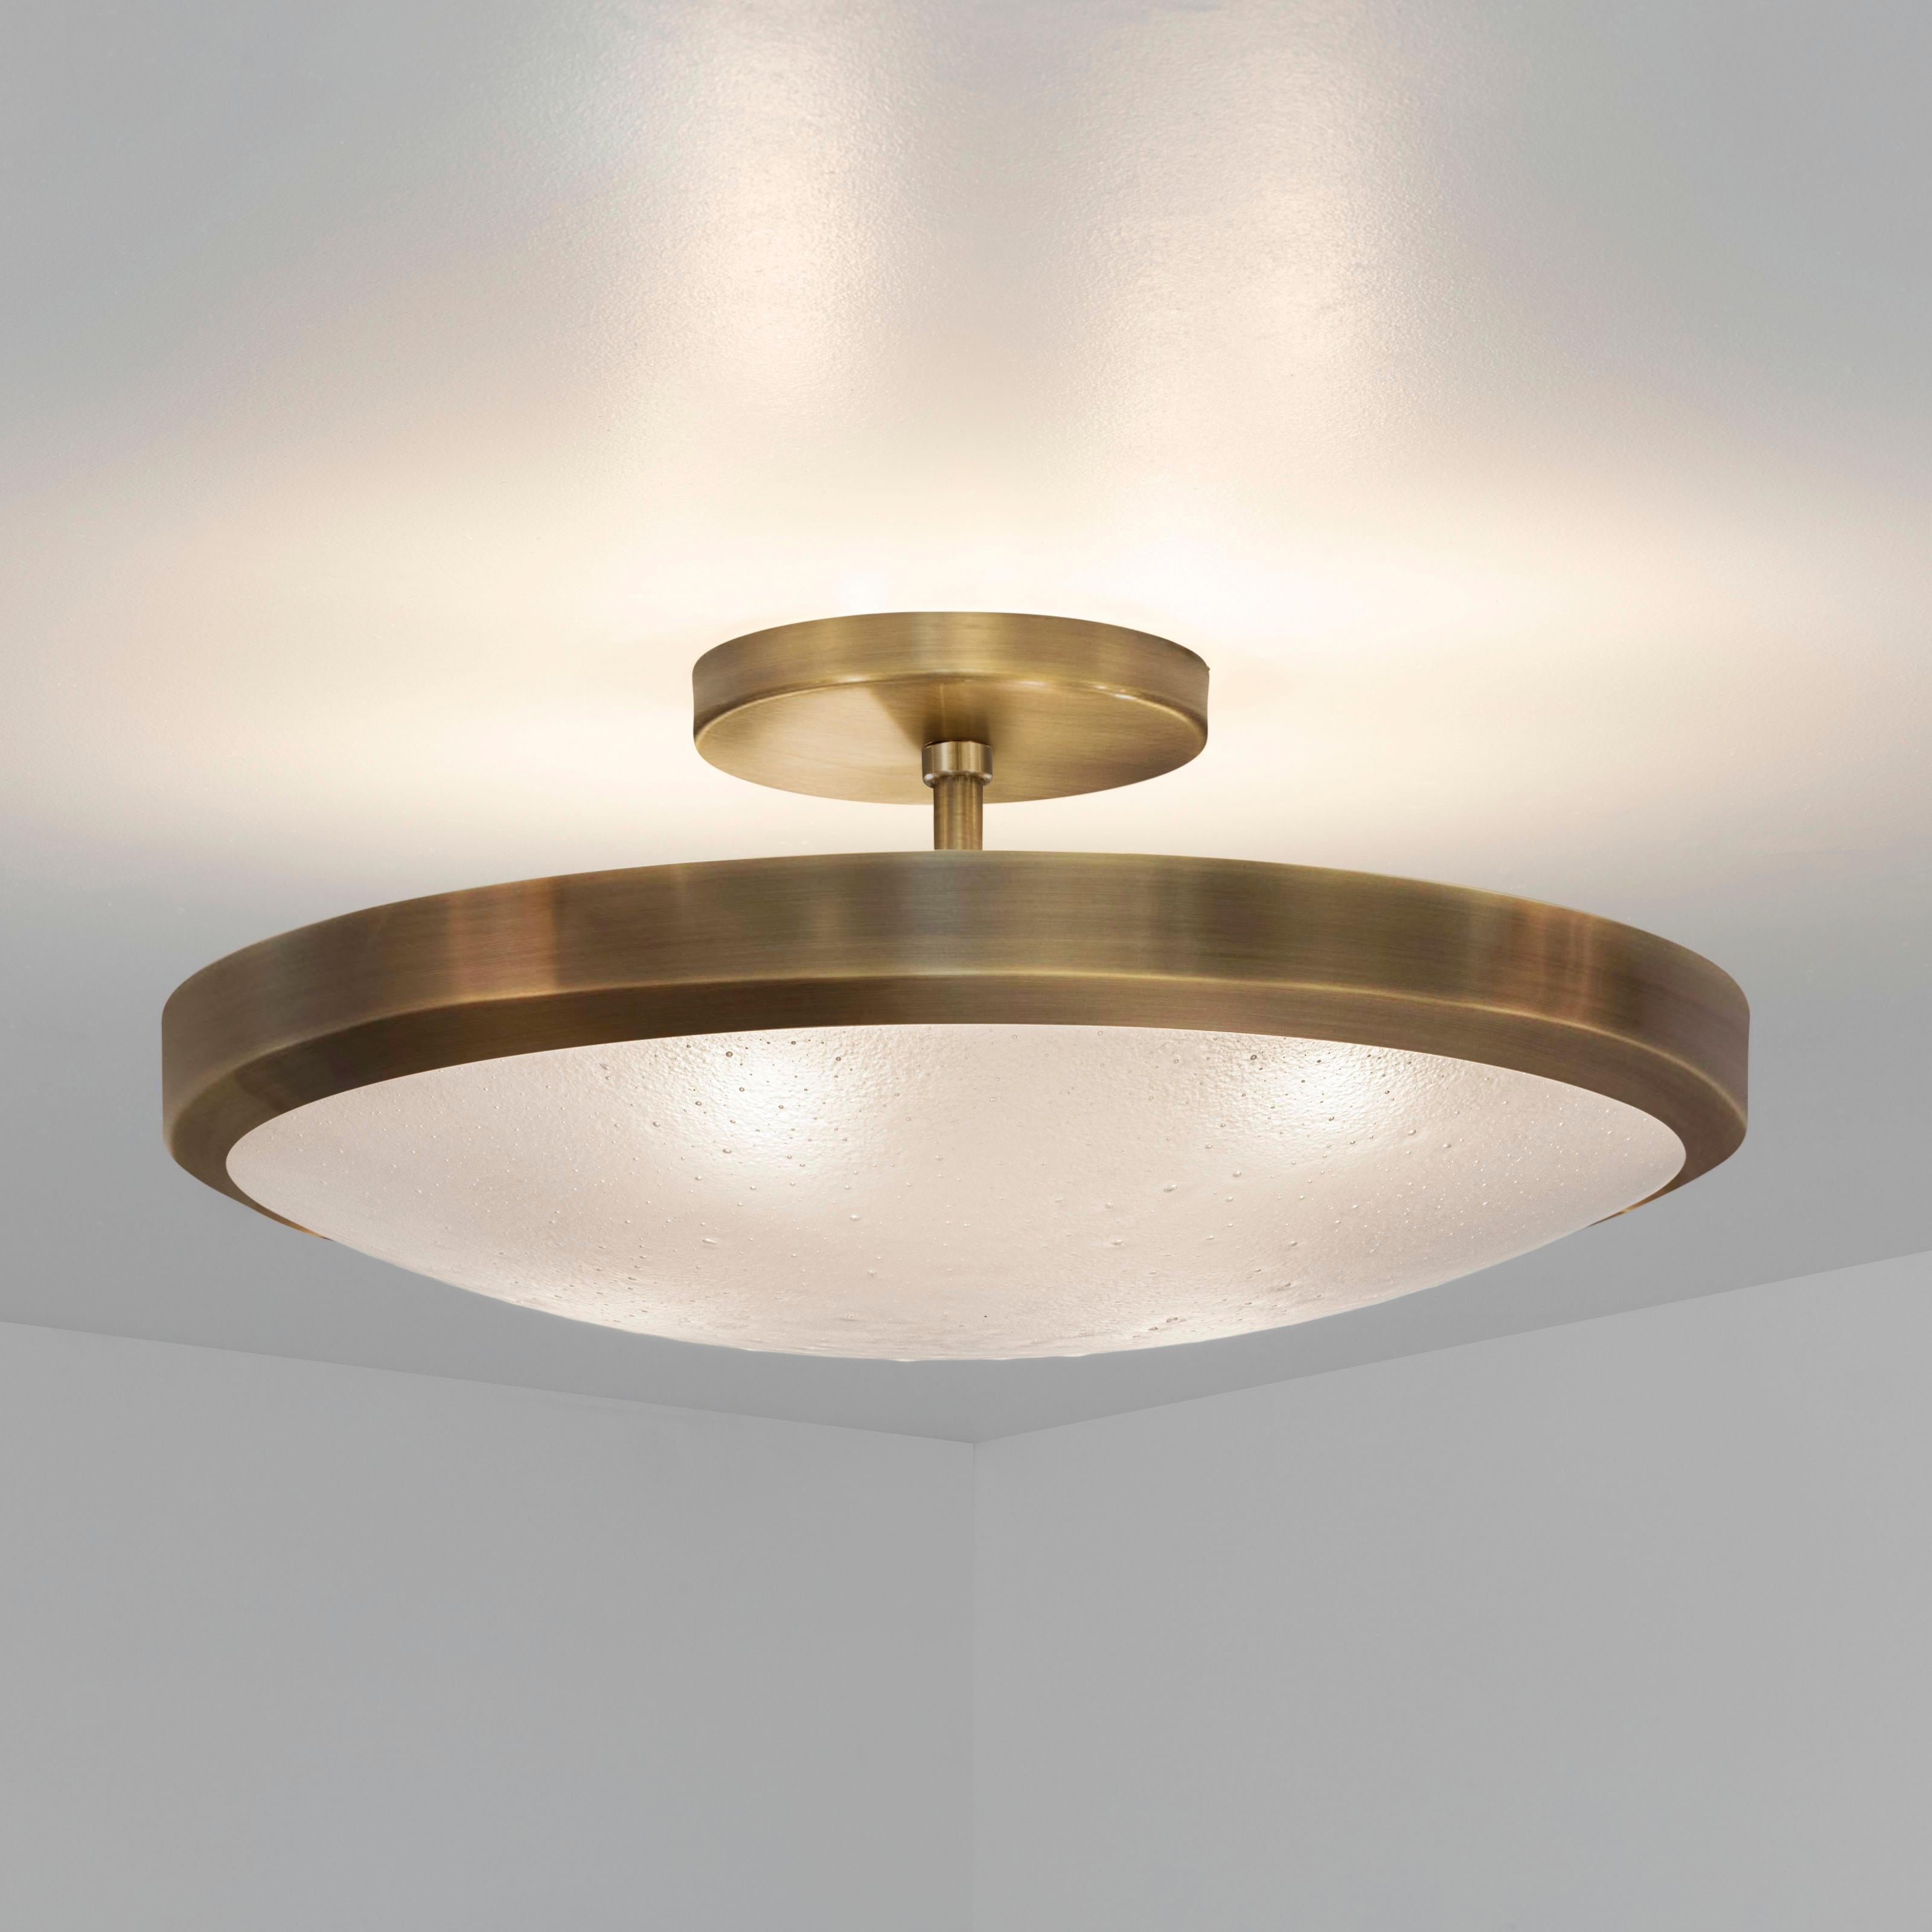 The Uno ceiling light exemplifies simple elegance via its clean profile designed around a single Murano glass shade.

Starting pricing by size-10% upcharge for specialty